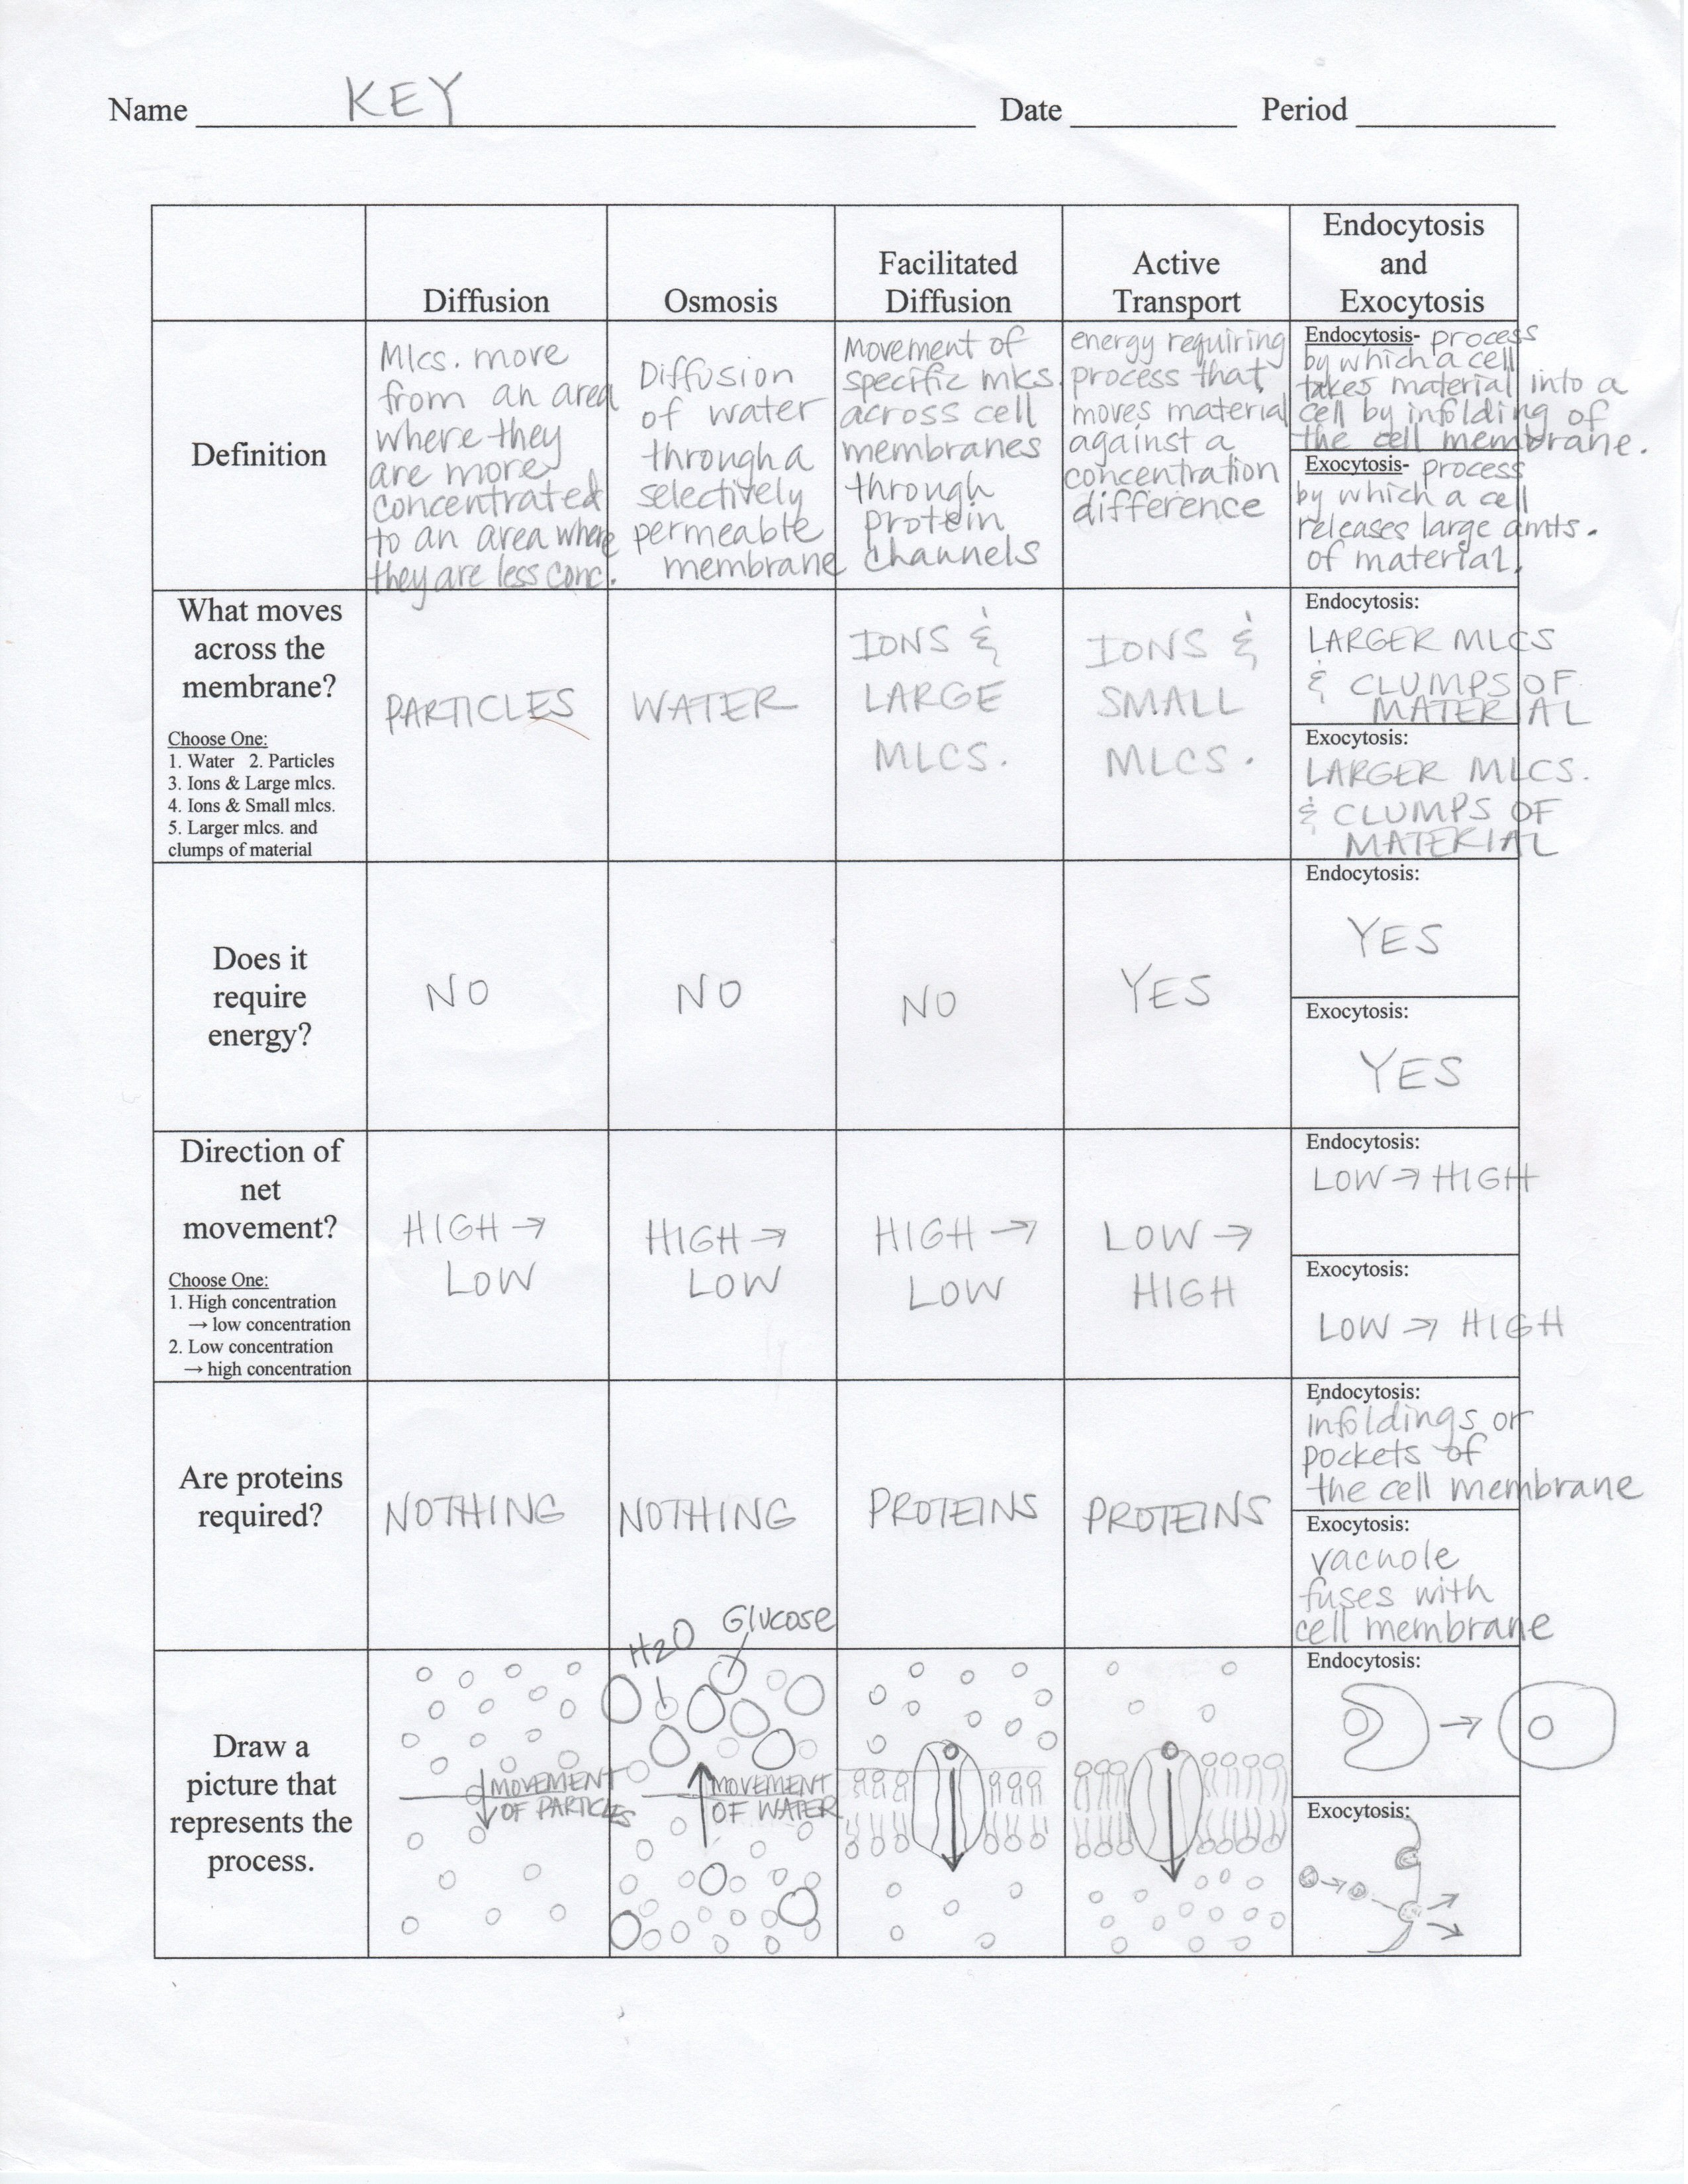 Documents For Cellular Transport Worksheet Section A Cell Membrane Structure Answer Key